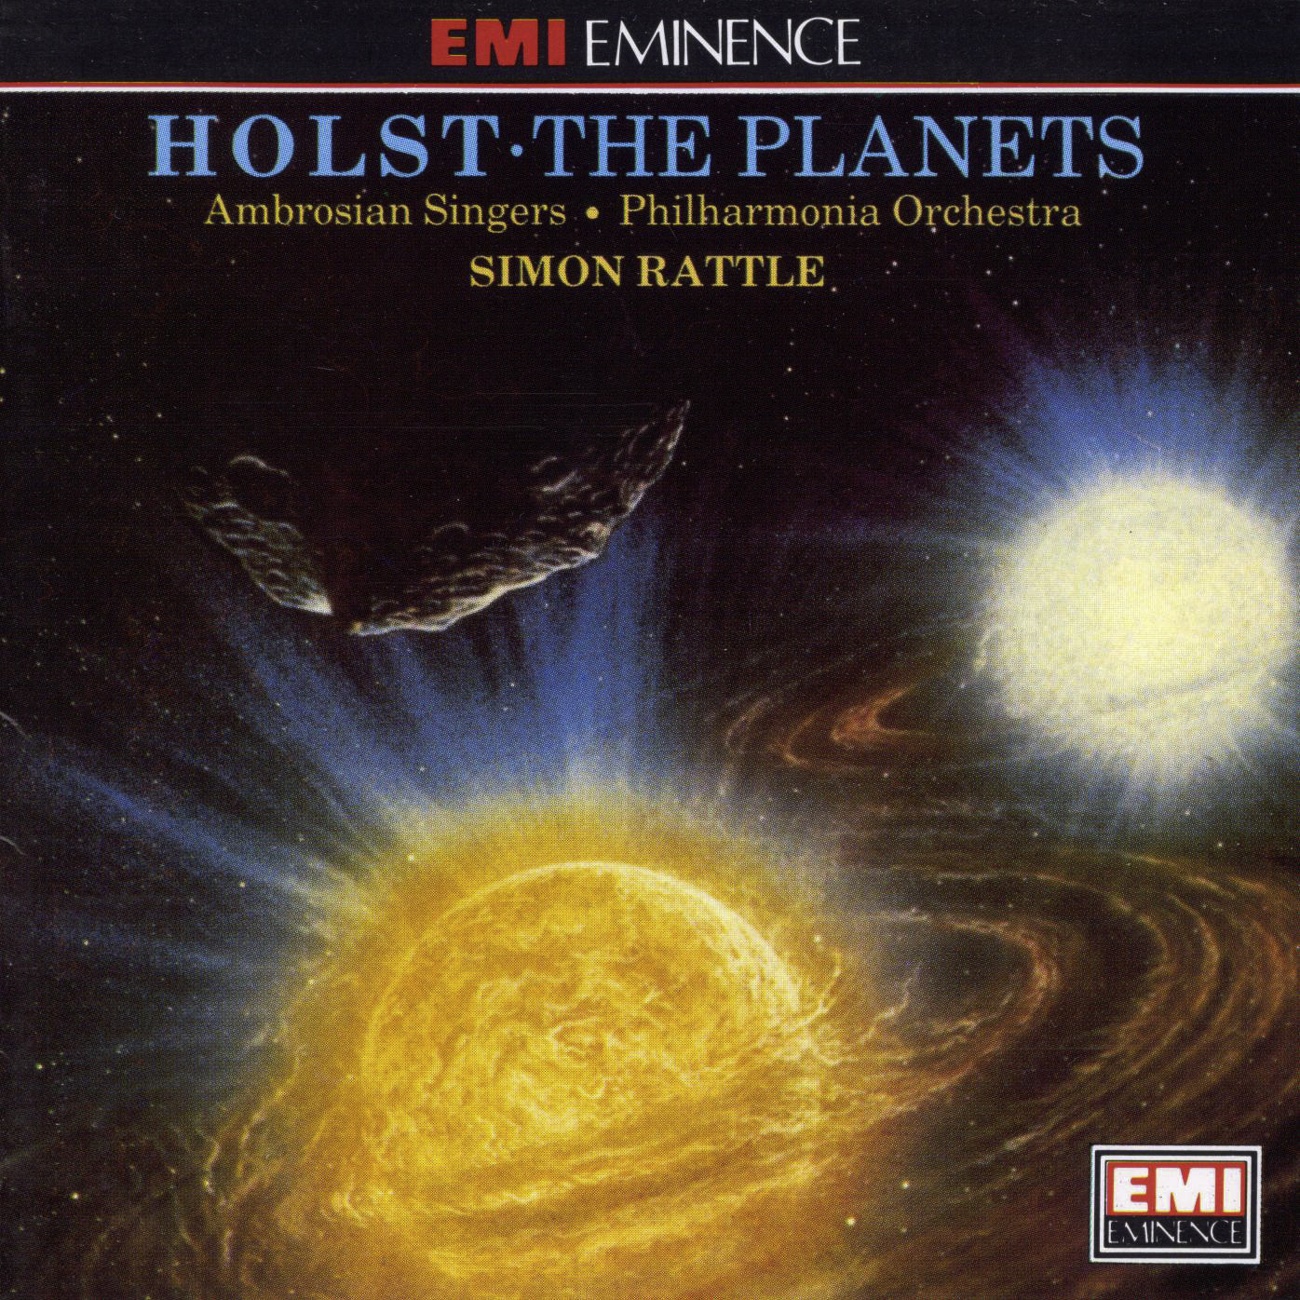 The Planets, Op. 32: 3. Mercury, the Winged Messenger (Vivace)